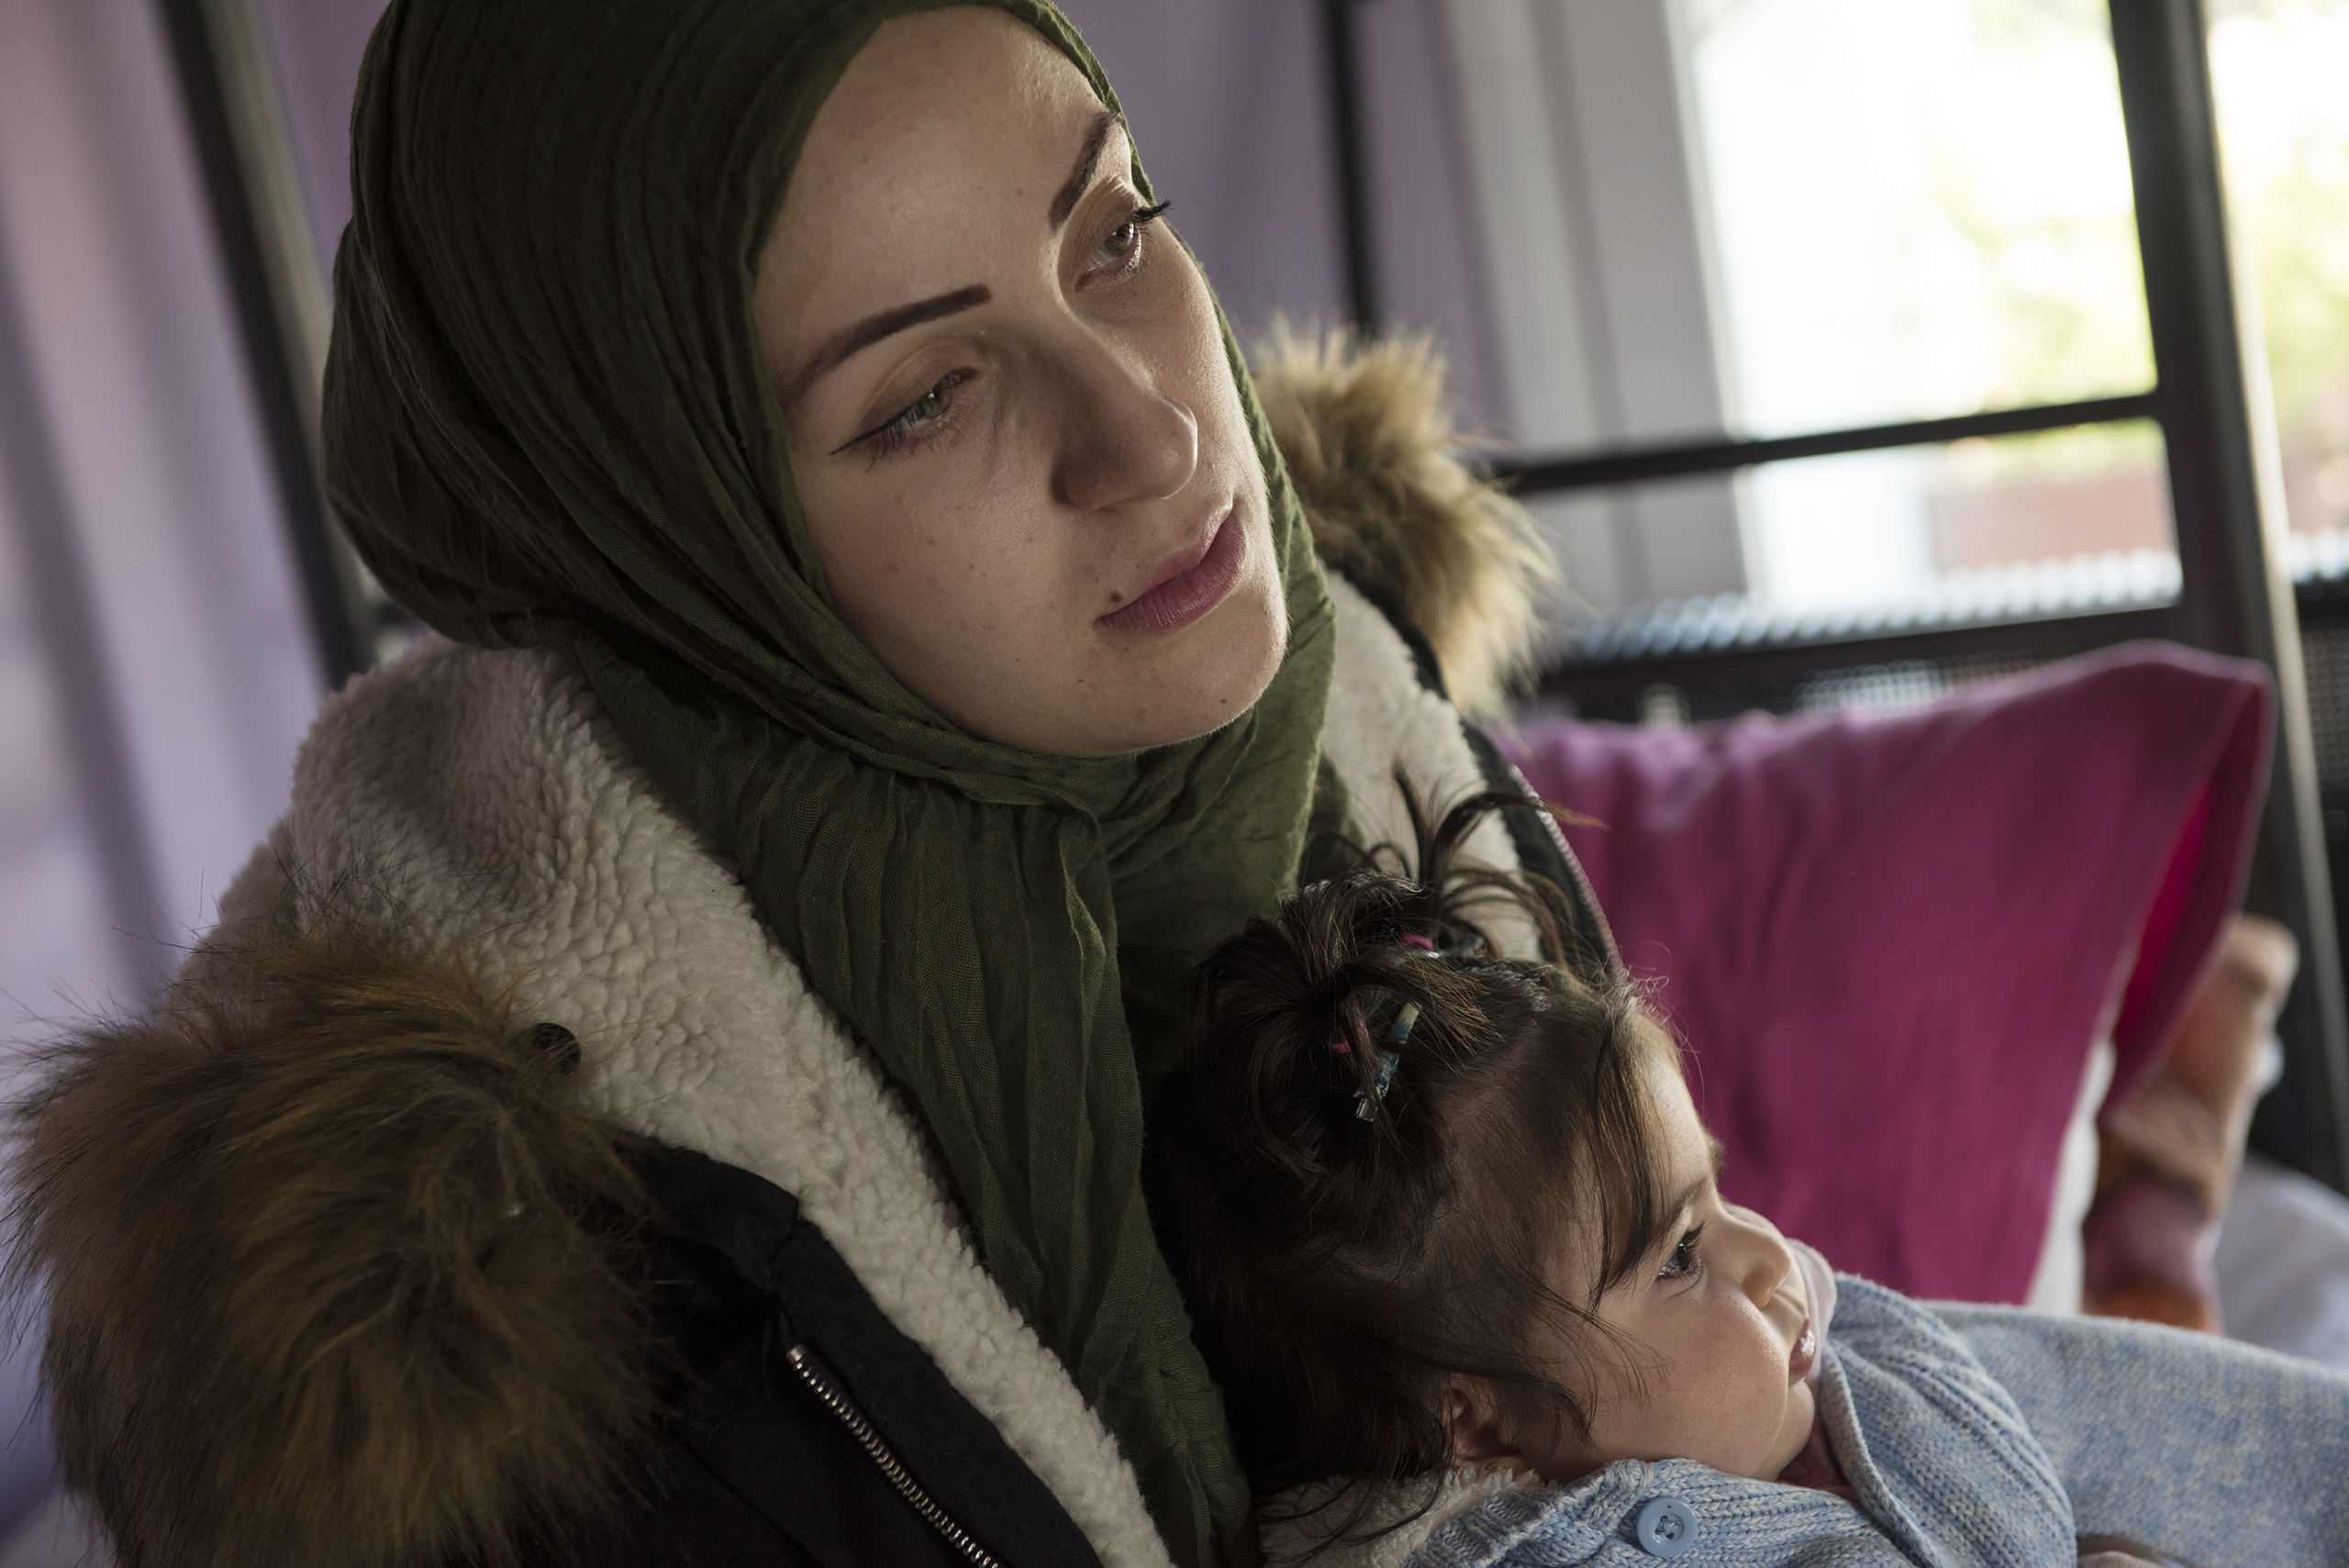 Syrian refugee, Taima, prepares to take her 6 month old daughter, Heln, for a visit to the Acropolis, while her husband, Muhannad Abzali, 28, jokes around with their other child, Wael, 3, at the temporary apartment they are staying at in Athens, Greece, March 31, 2017.